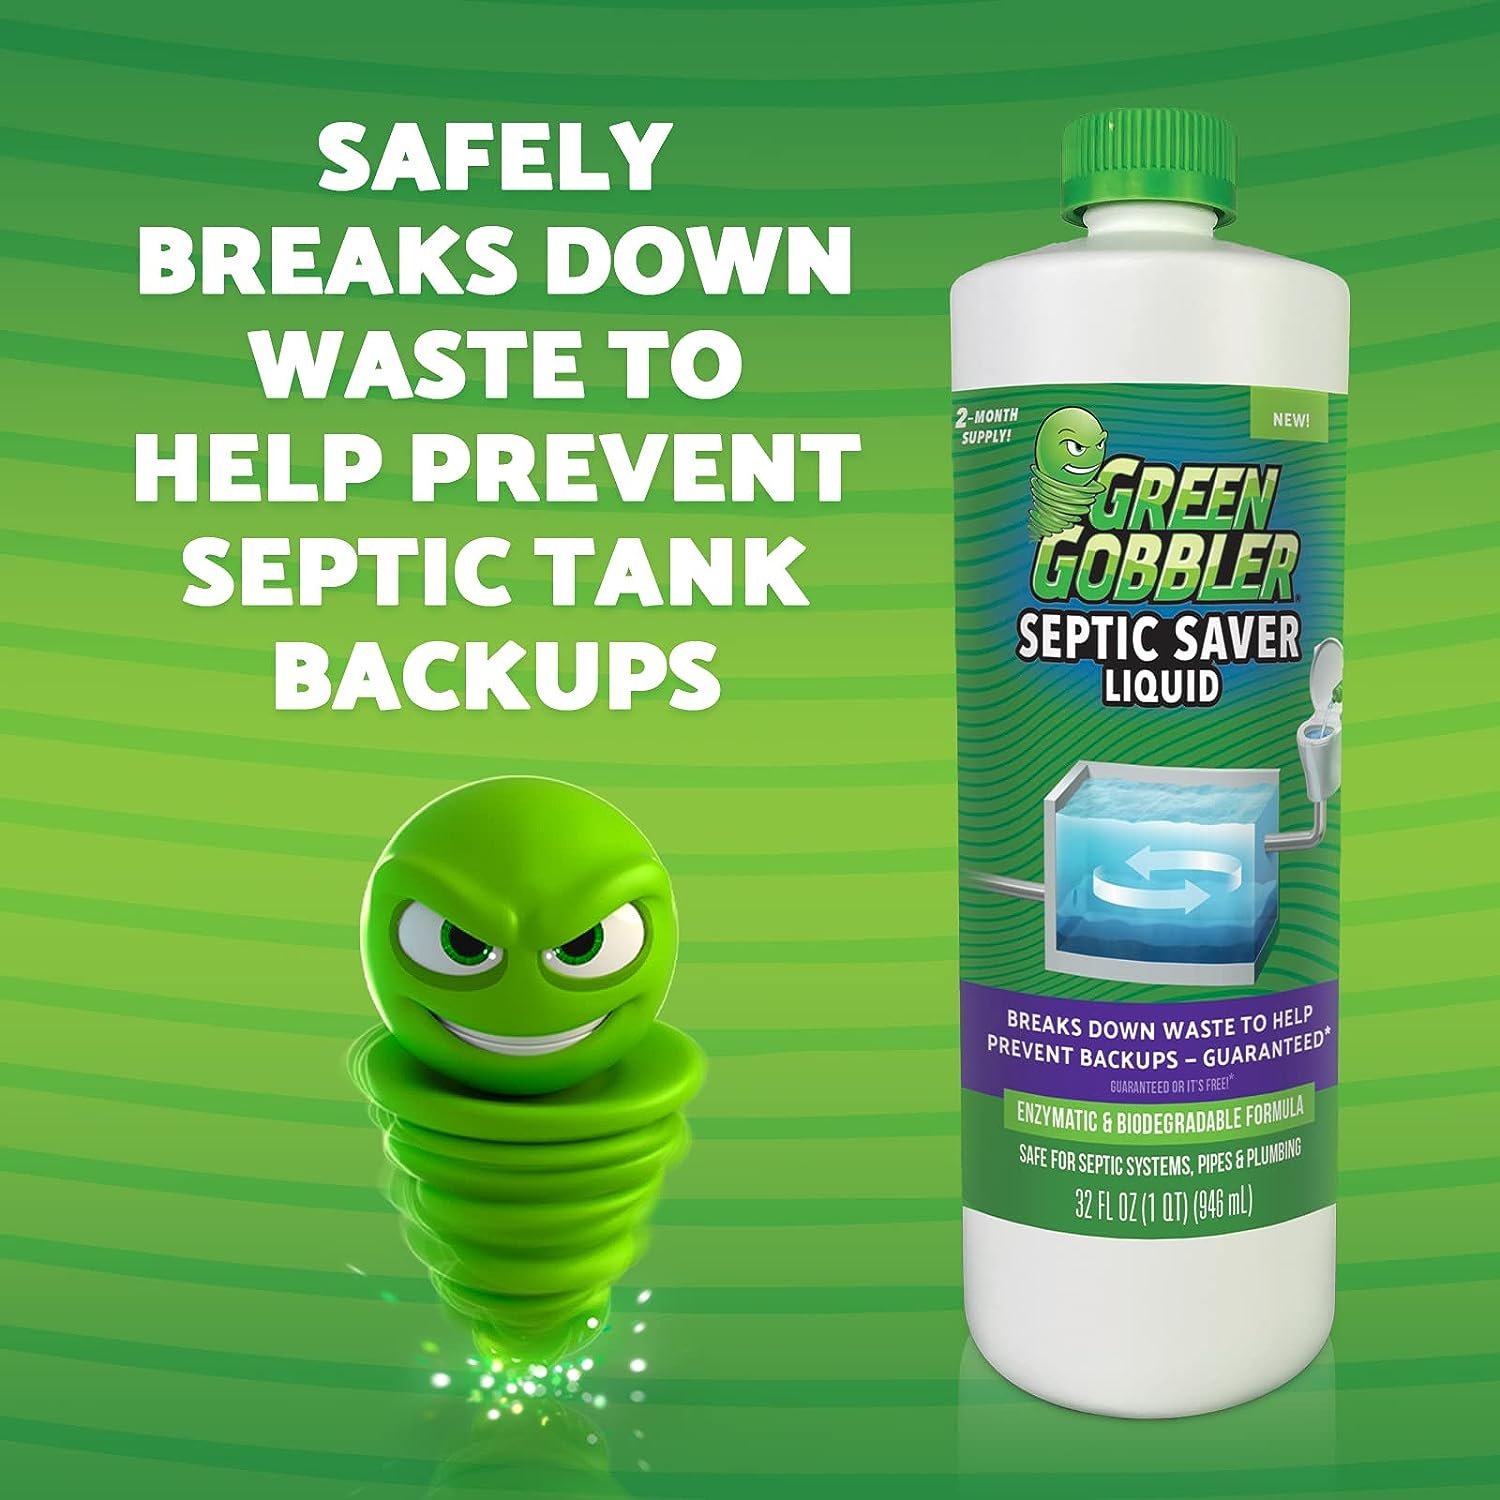 Green Gobbler Septic Saver Liquid Septic Tank Treatment with Natural Enzymes | Safe for Septic Systems, Pipes + Plumbing | Money-Back Guarantee, 2 Pack